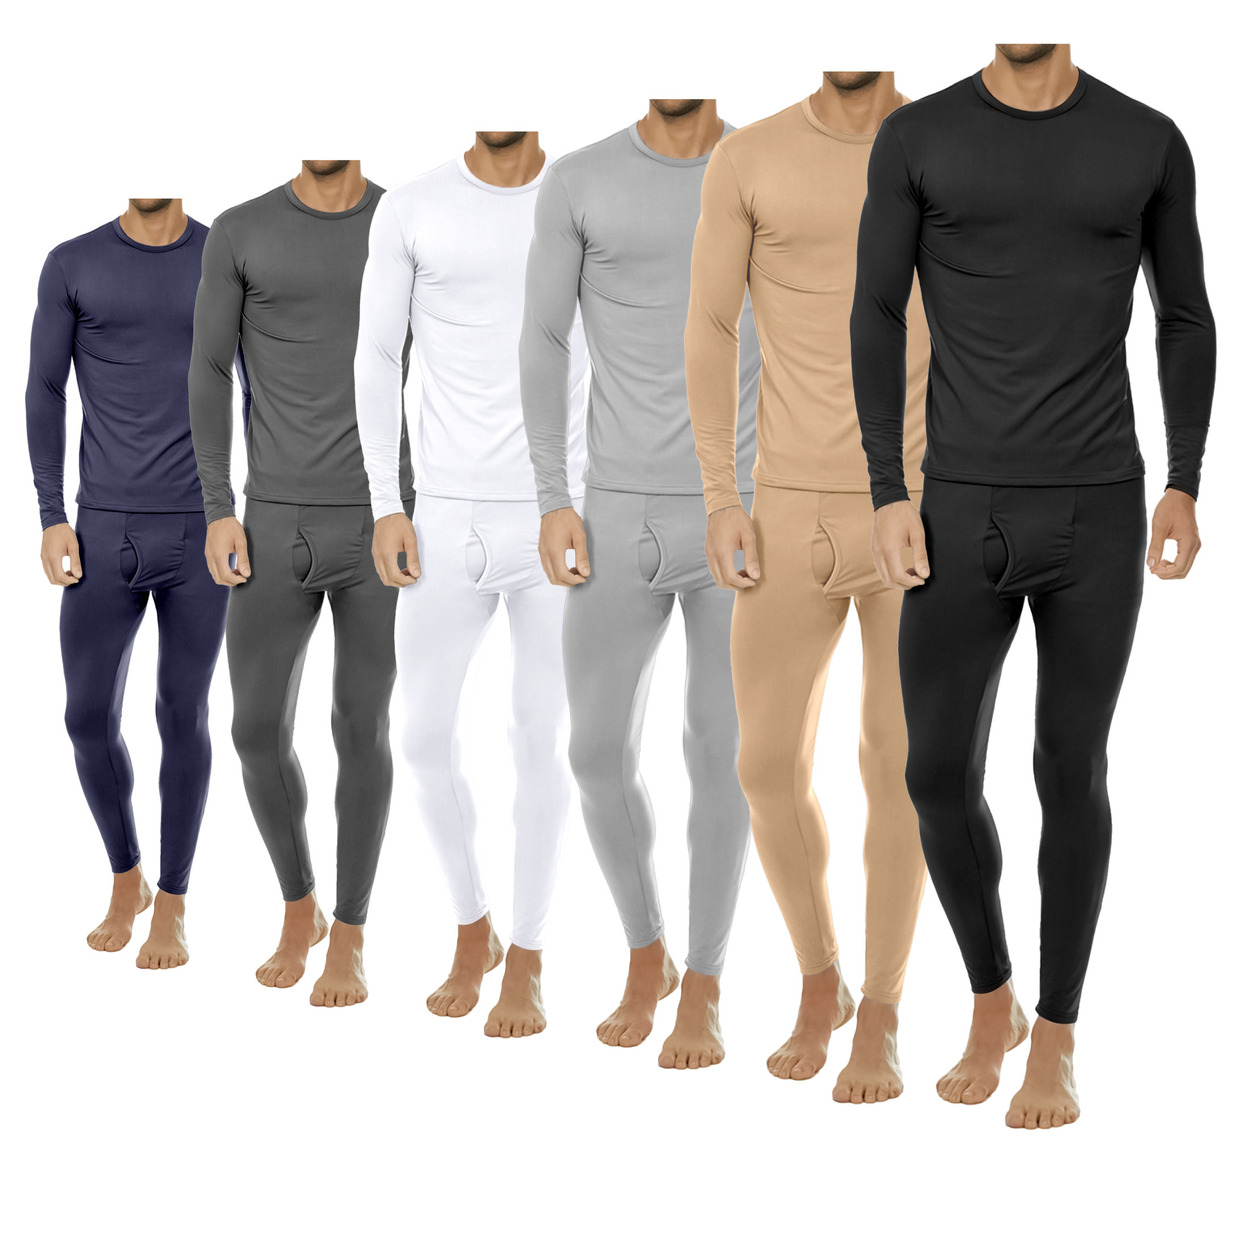 2-Sets: Men's Winter Warm Fleece Lined Thermal Underwear Set For Cold Weather - Navy&navy, Large